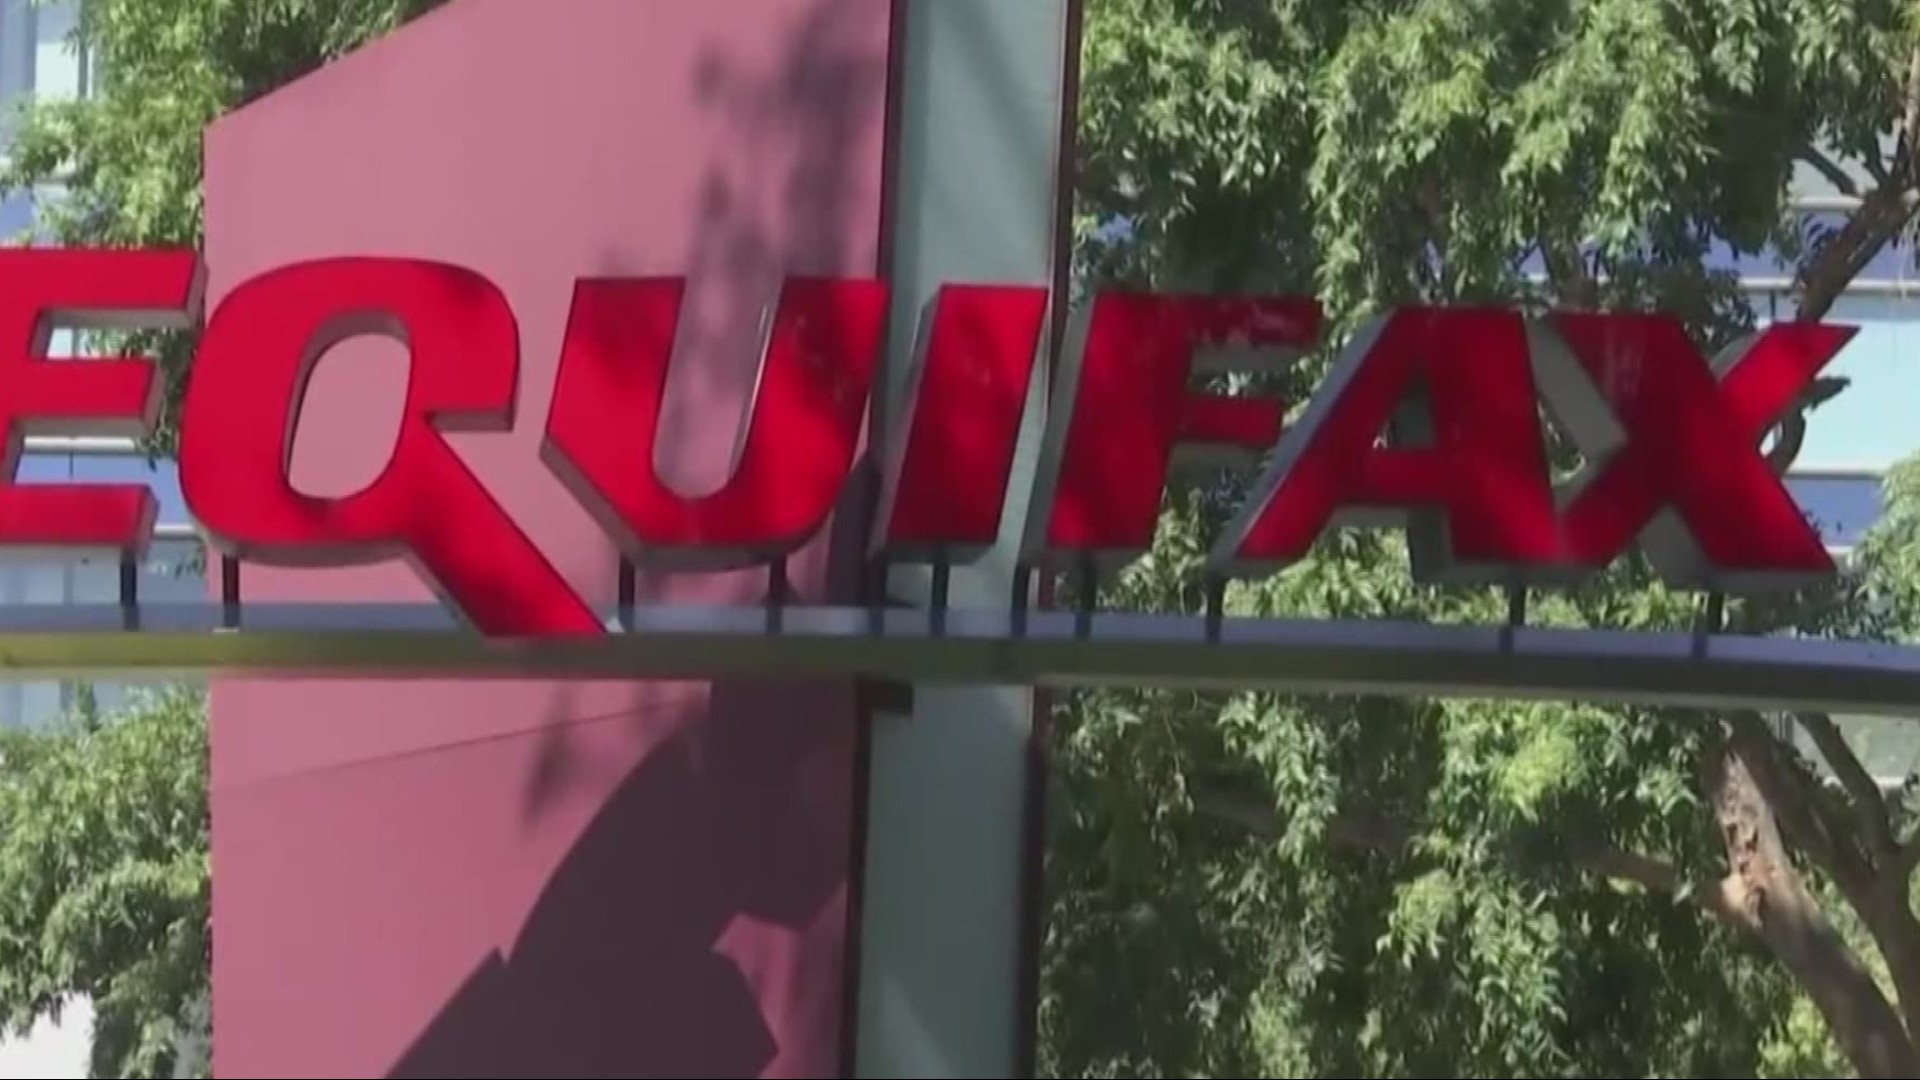 Earlier this week, we told you how Equifax settled for 700 million dollars after nearly half the country's data was hacked in 2017. Now we show you how to check if you were affected and what you should do if you were.